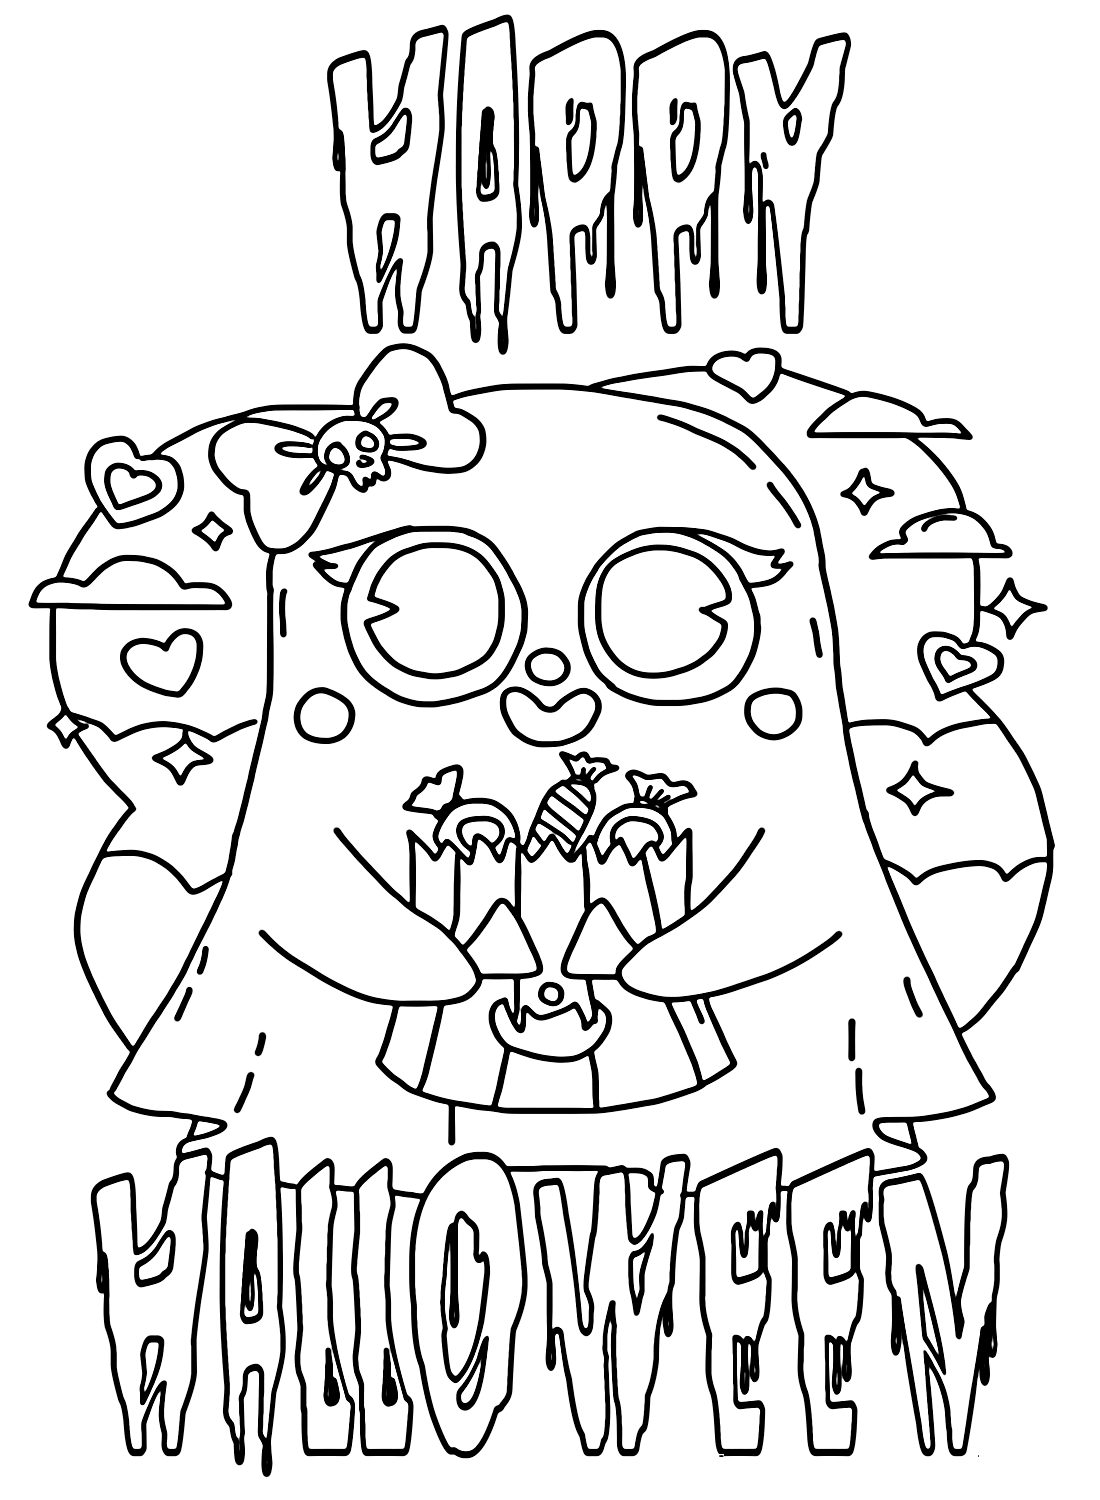 Free Happy Halloween Coloring Pages - Free Printable Coloring Pages